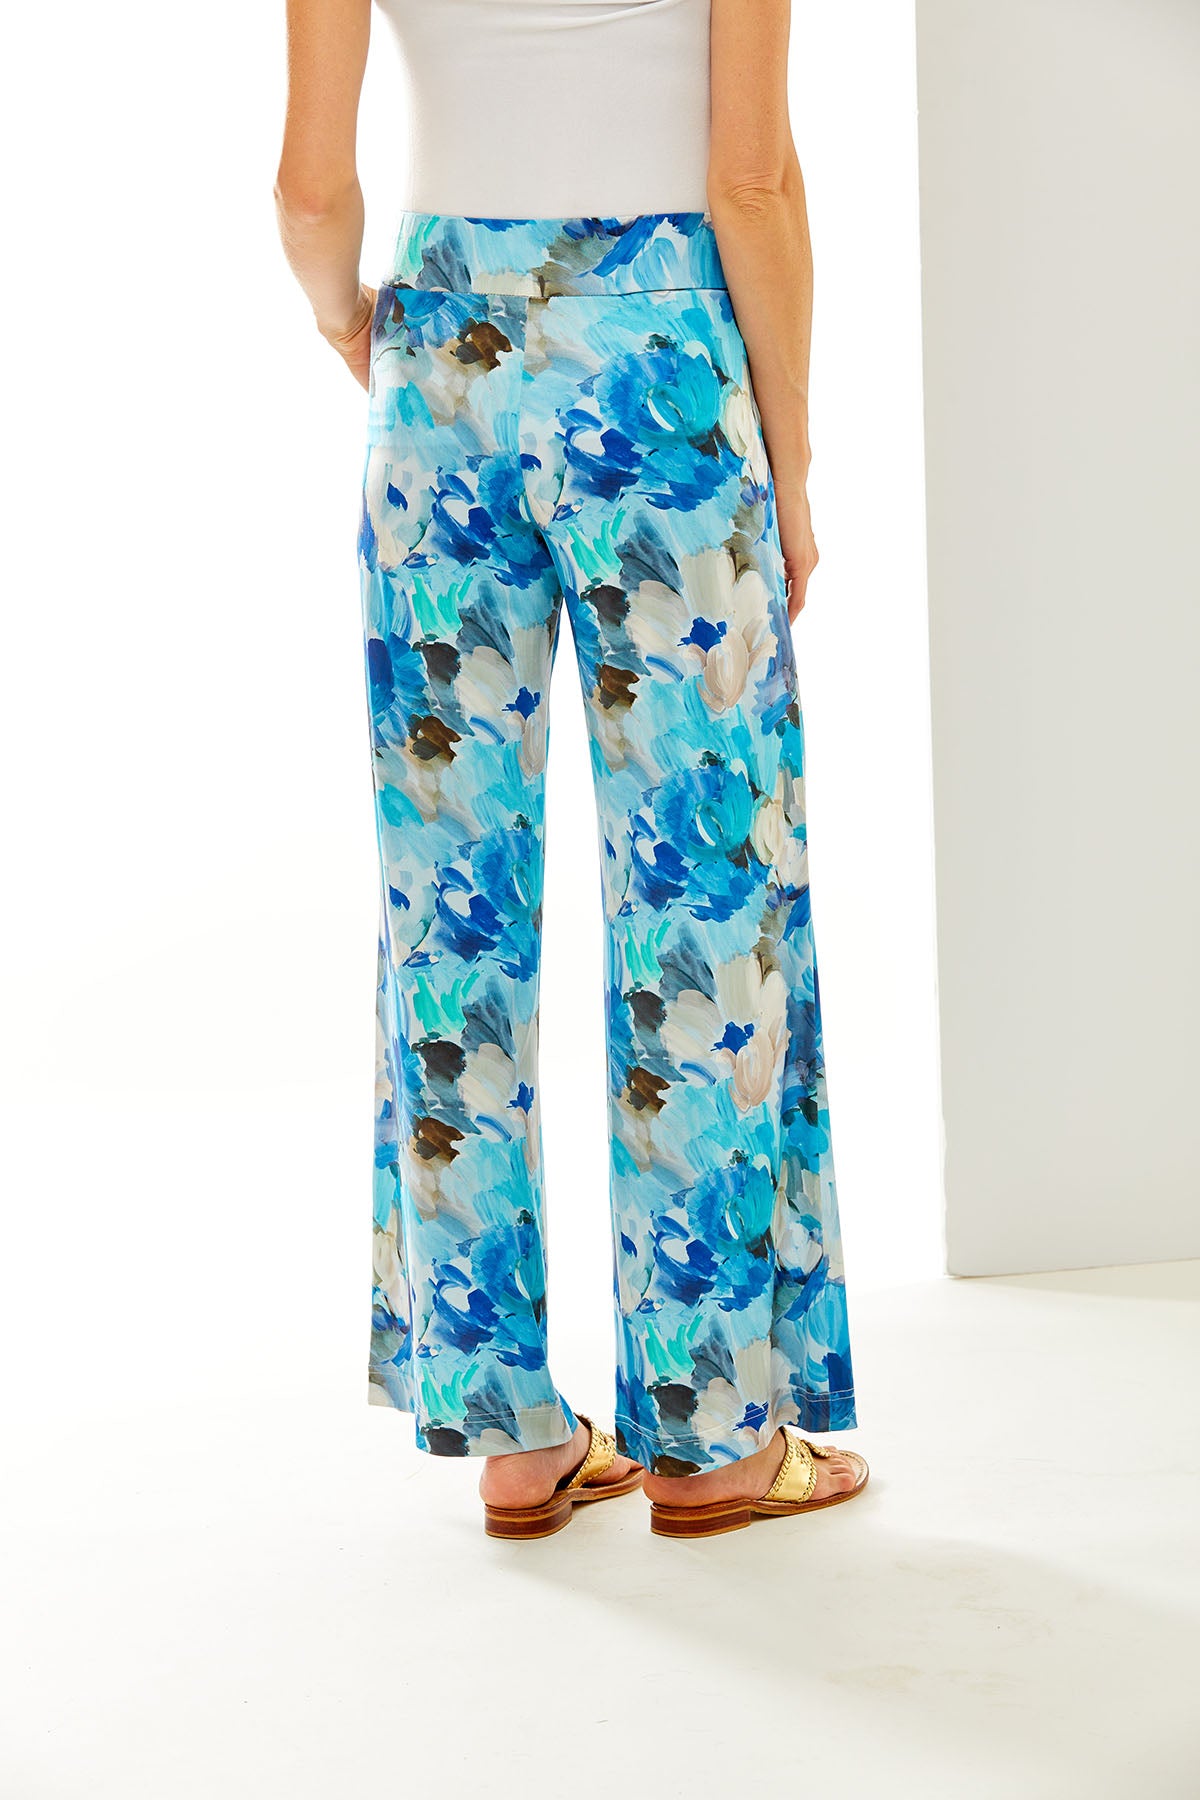 Woman in blue floral pants